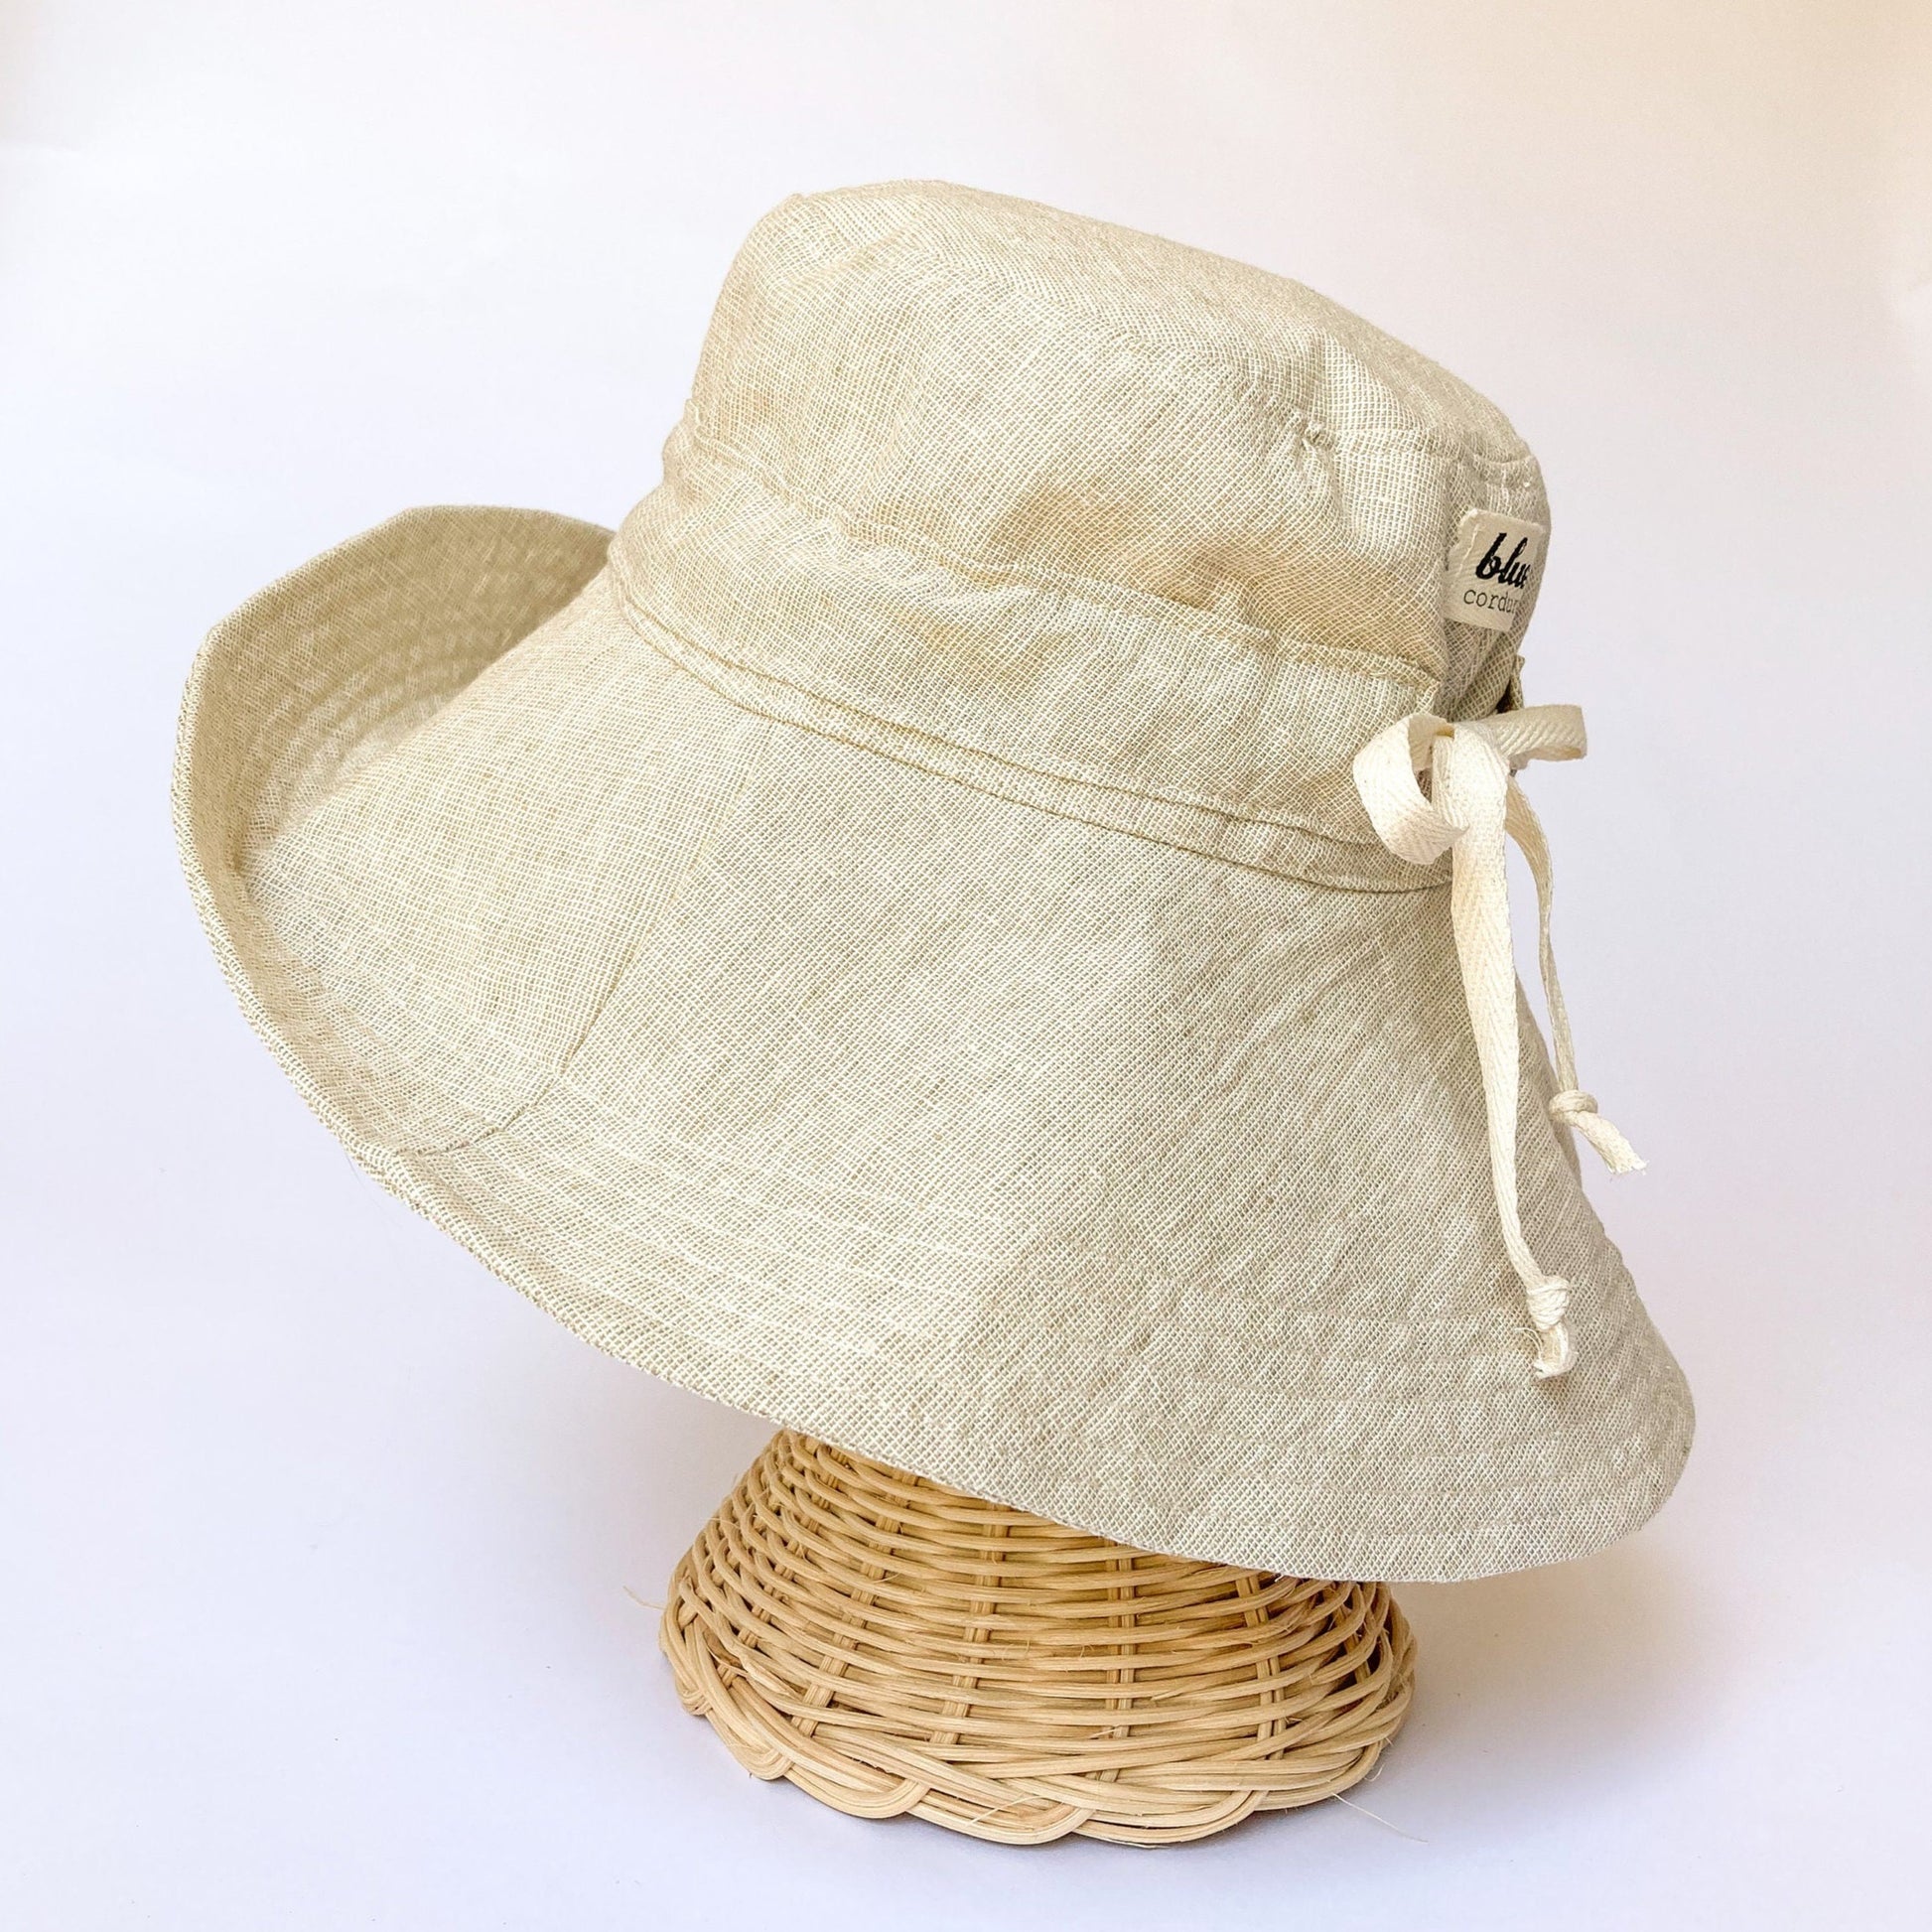 Big Brimmed Sun Hat with Inner Drawstring